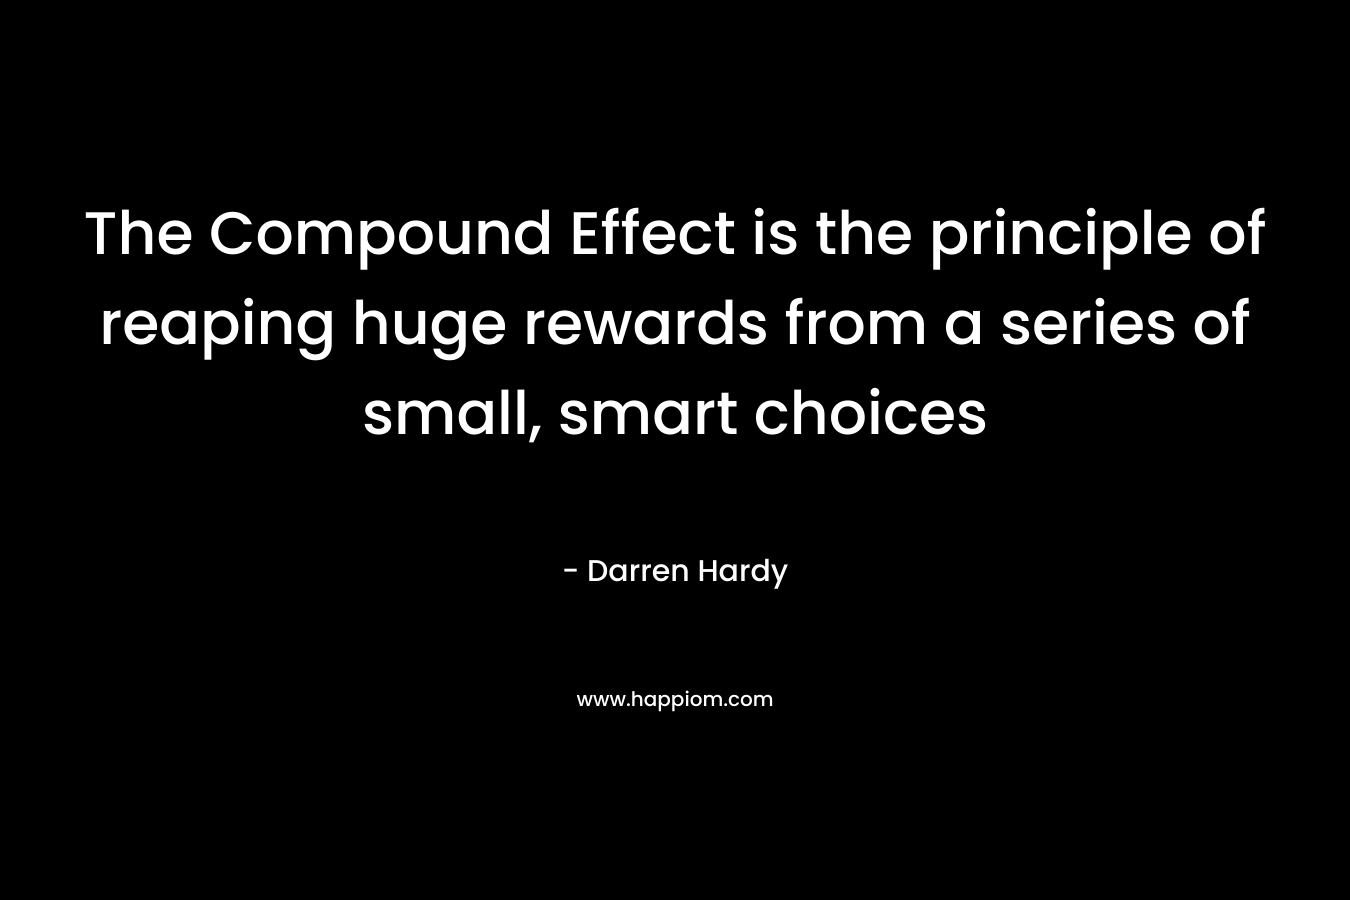 The Compound Effect is the principle of reaping huge rewards from a series of small, smart choices – Darren Hardy